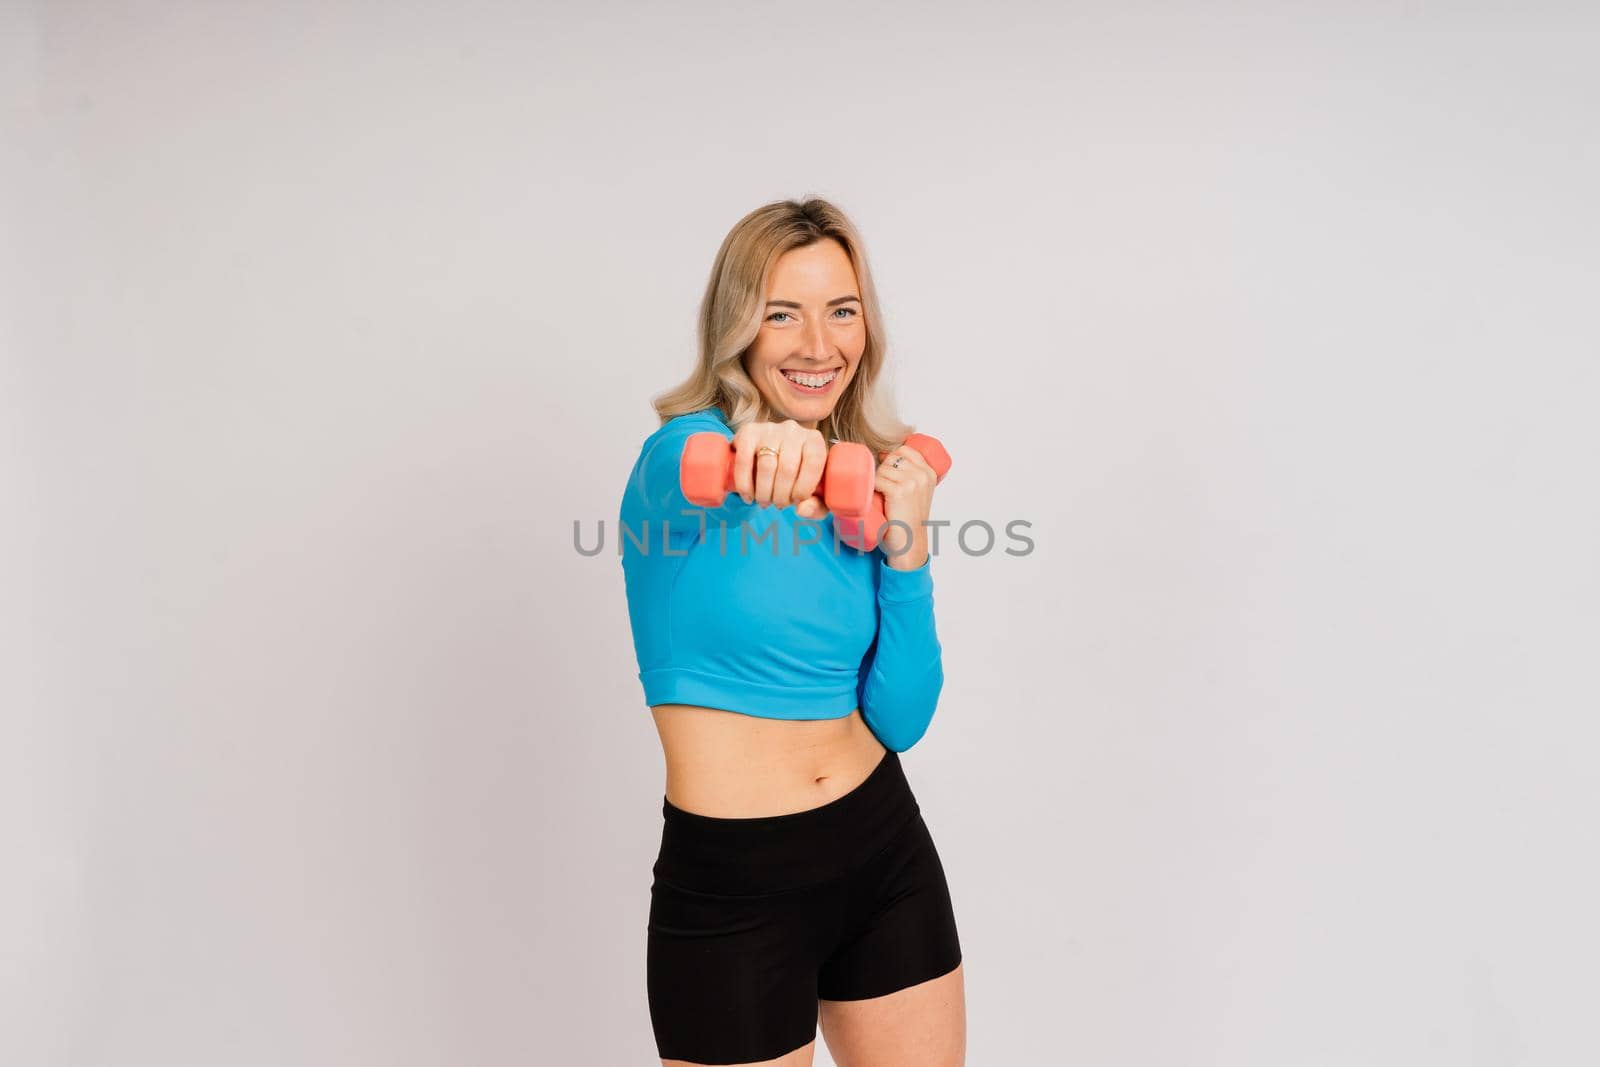 Sporty girl doing exercise with dumbbells, silhouette studio shot over a dark and white background